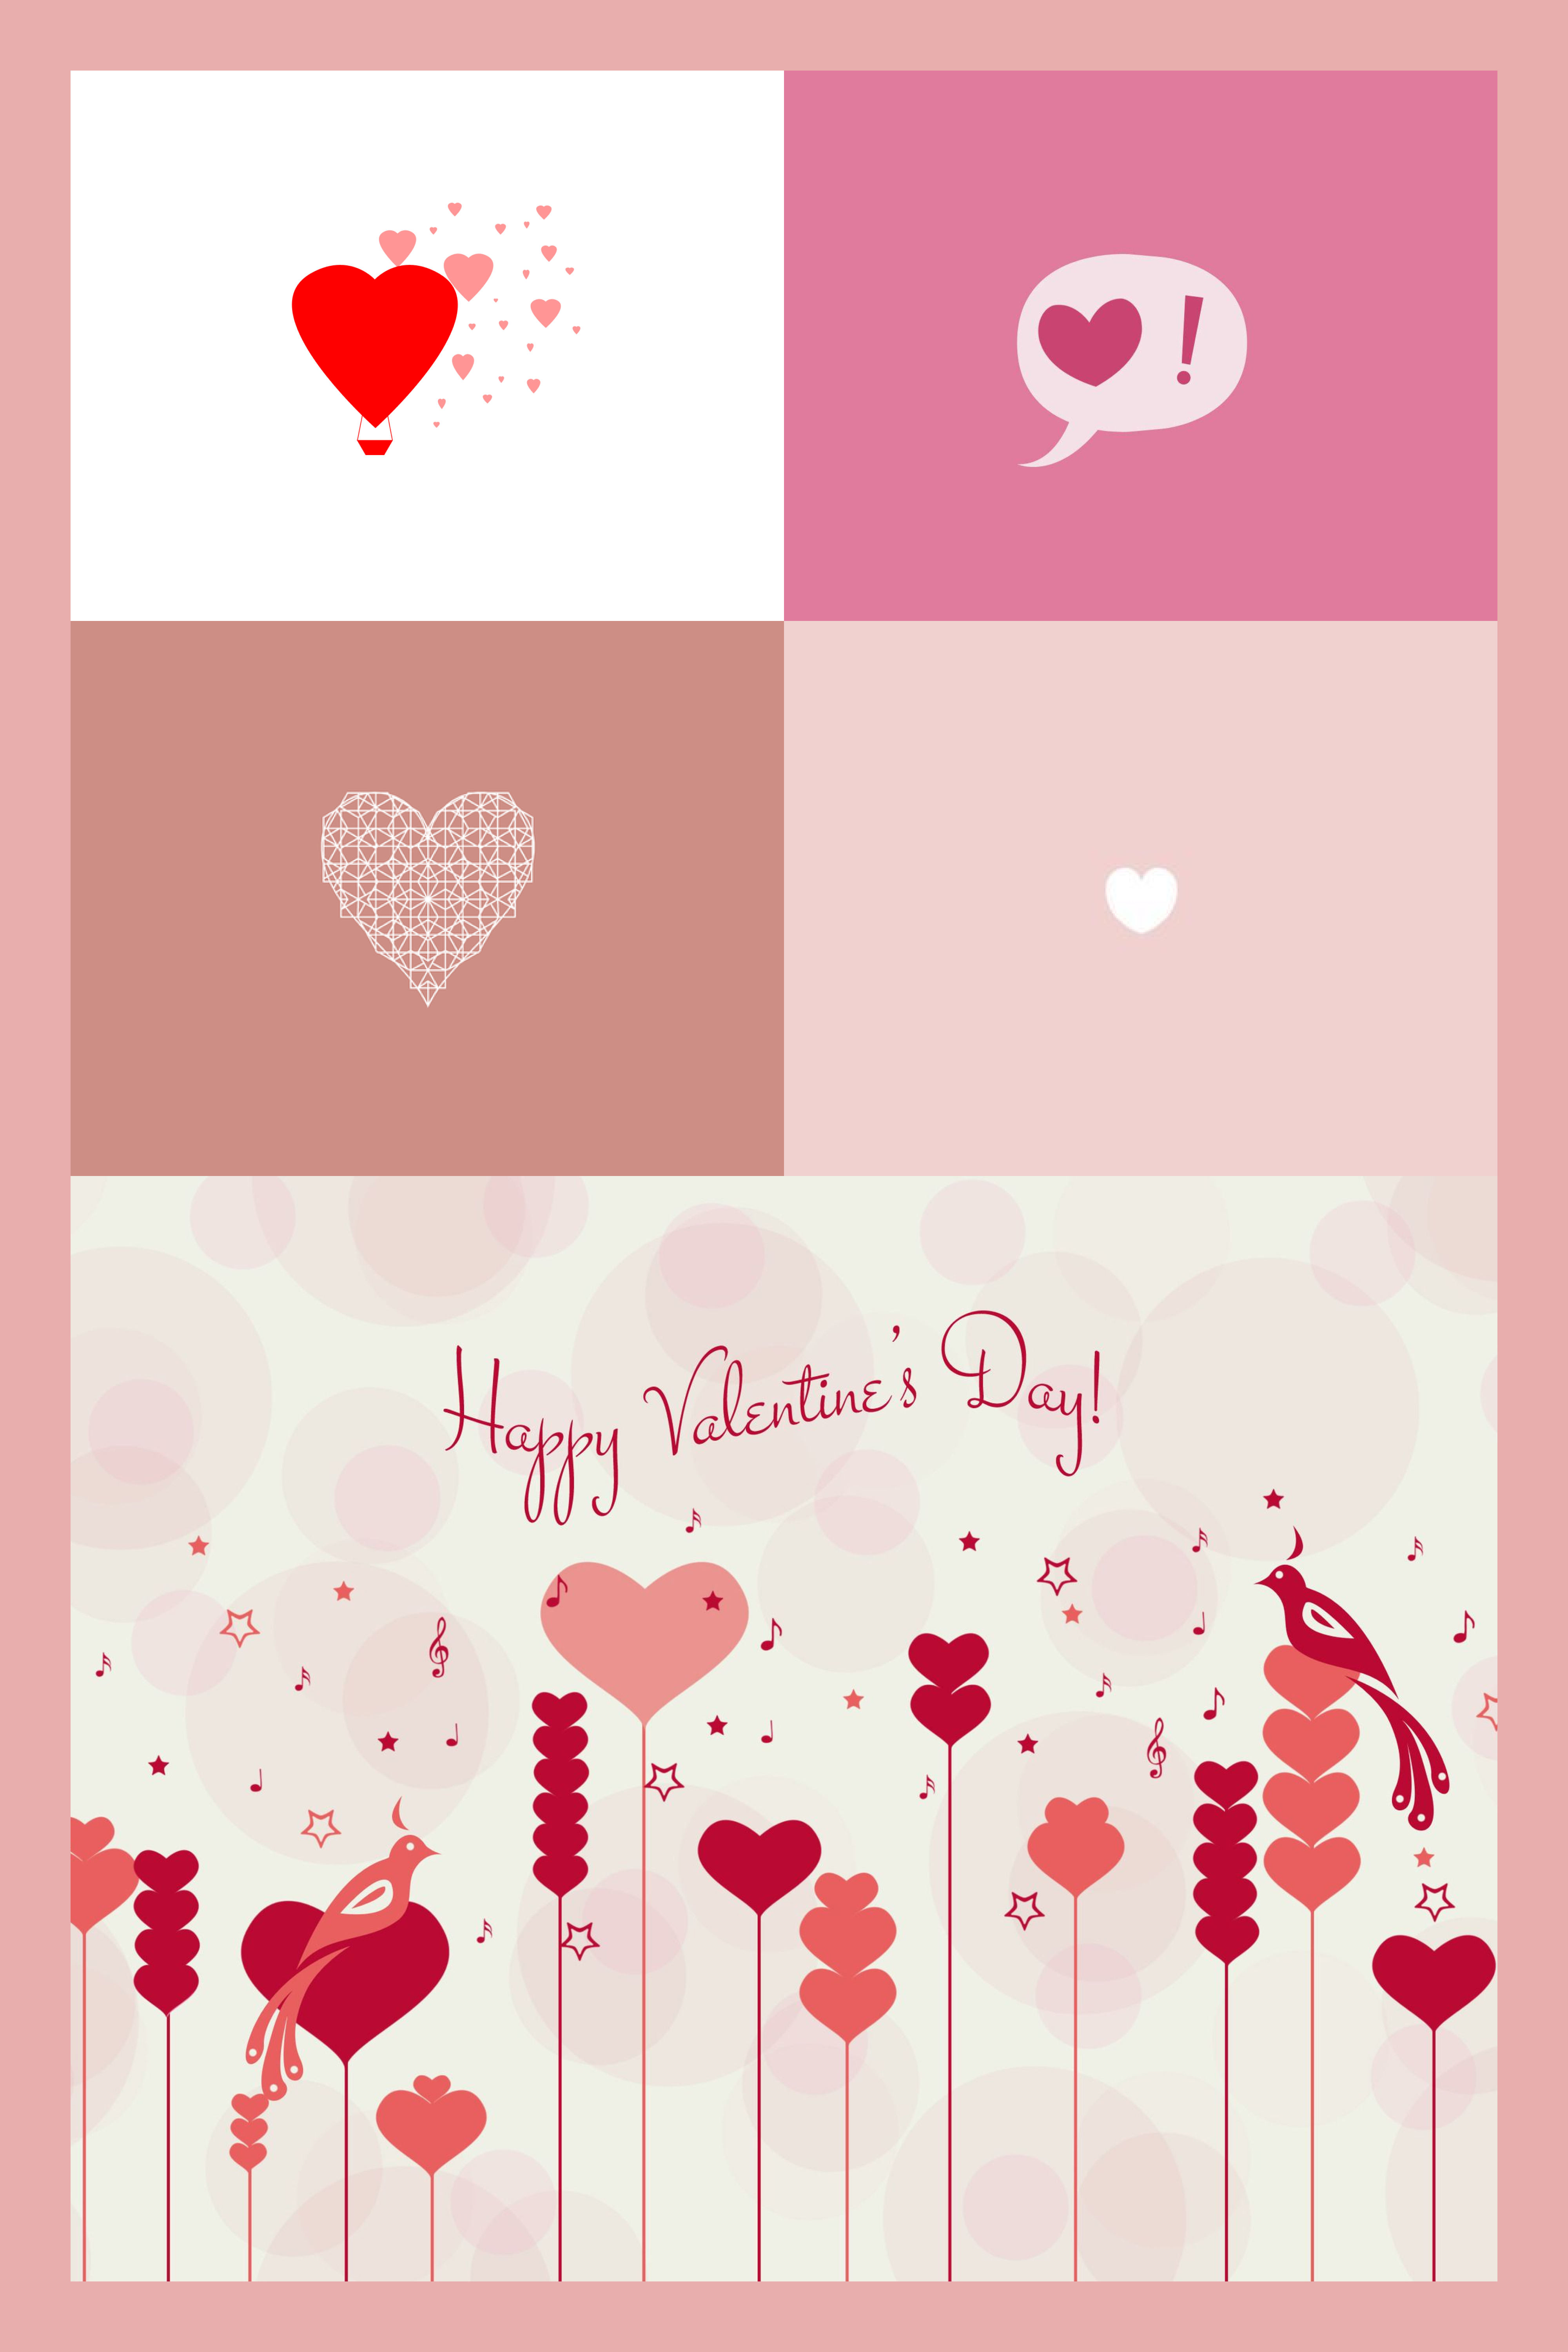 50+ Free Valentine's Day Aesthetic Wallpaper For Your Phone!  Valentines  wallpaper iphone, Valentines wallpaper, Valentine background